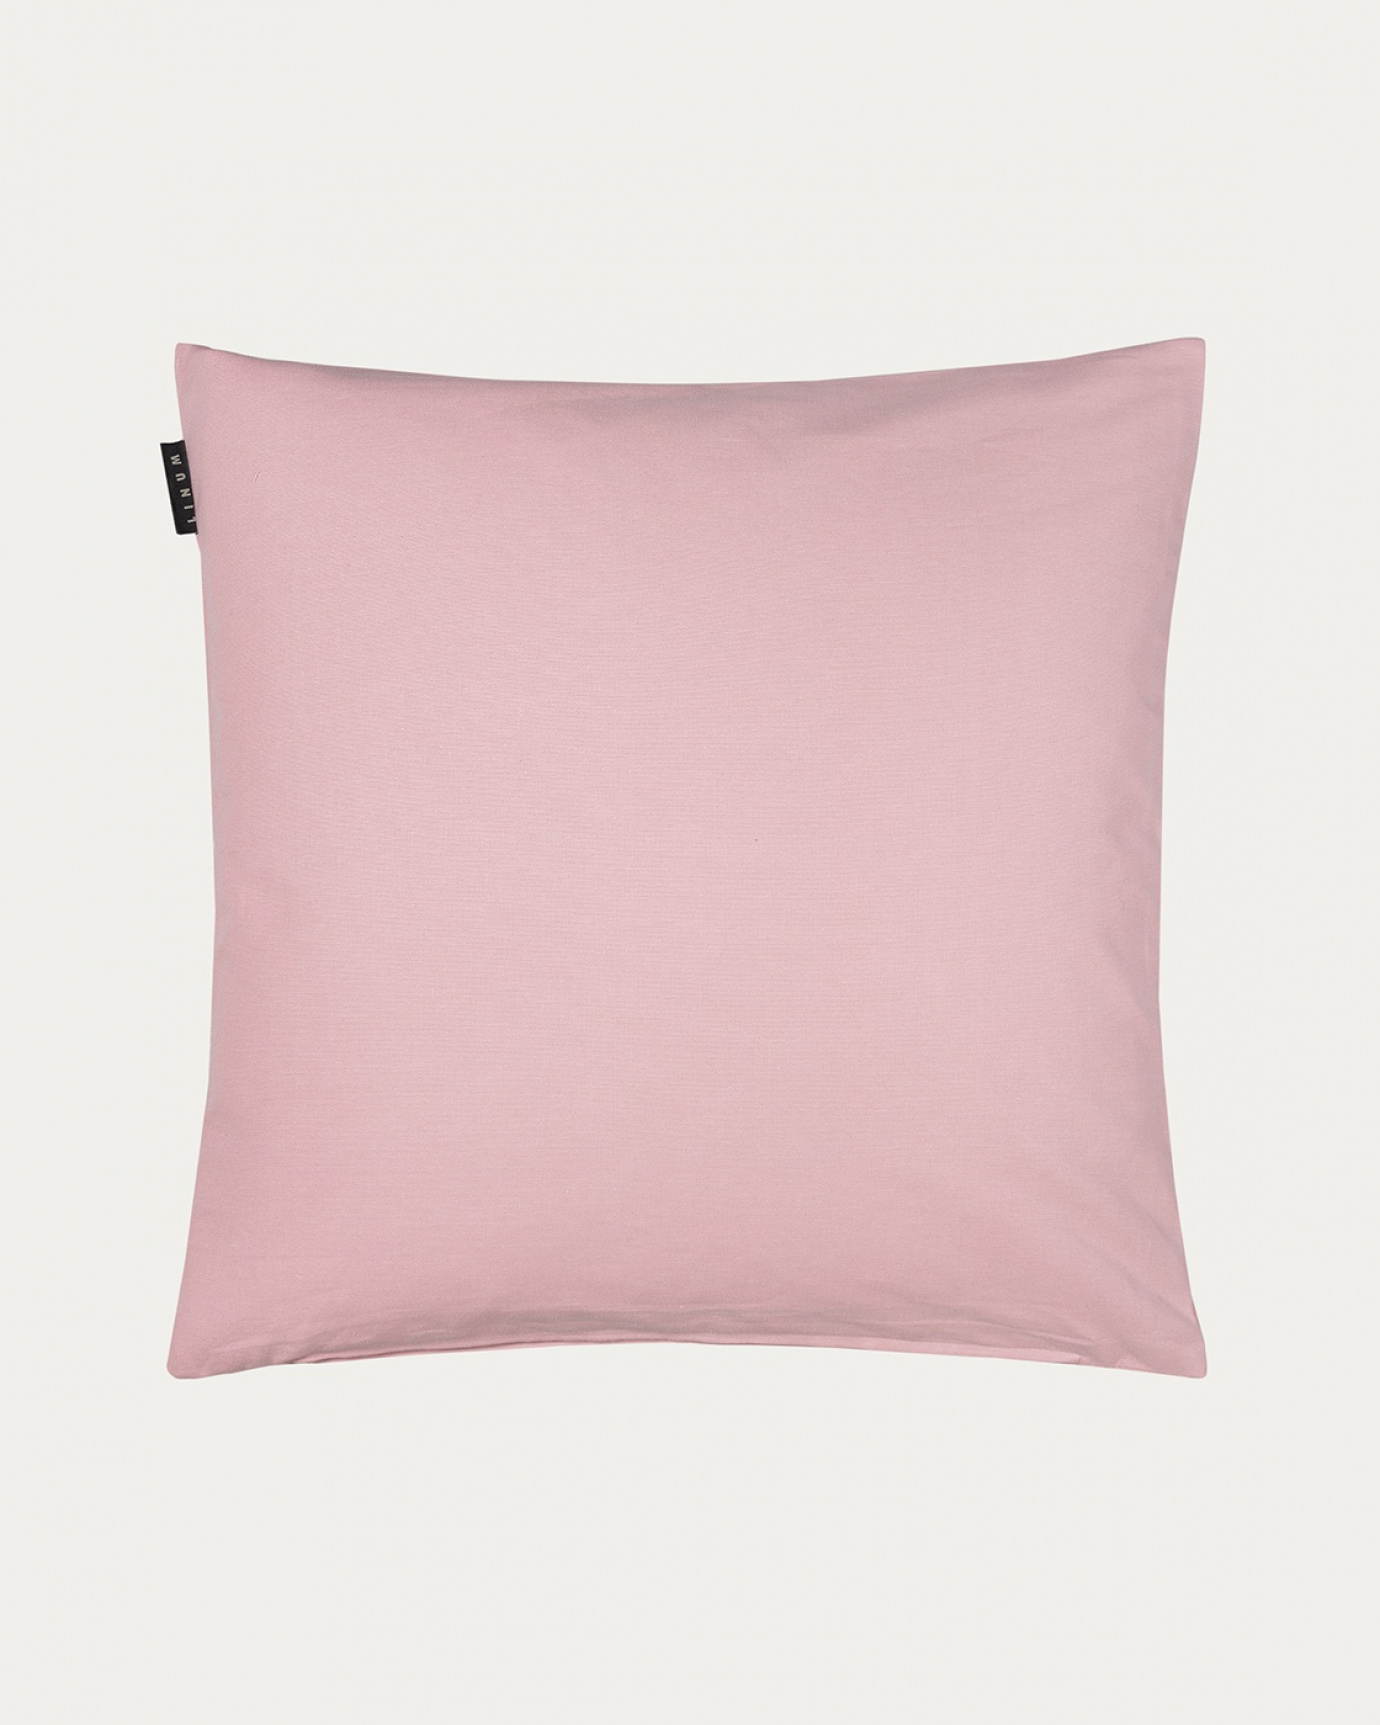 Product image dusty pink ANNABELL cushion cover made of soft cotton from LINUM DESIGN. Size 50x50 cm.